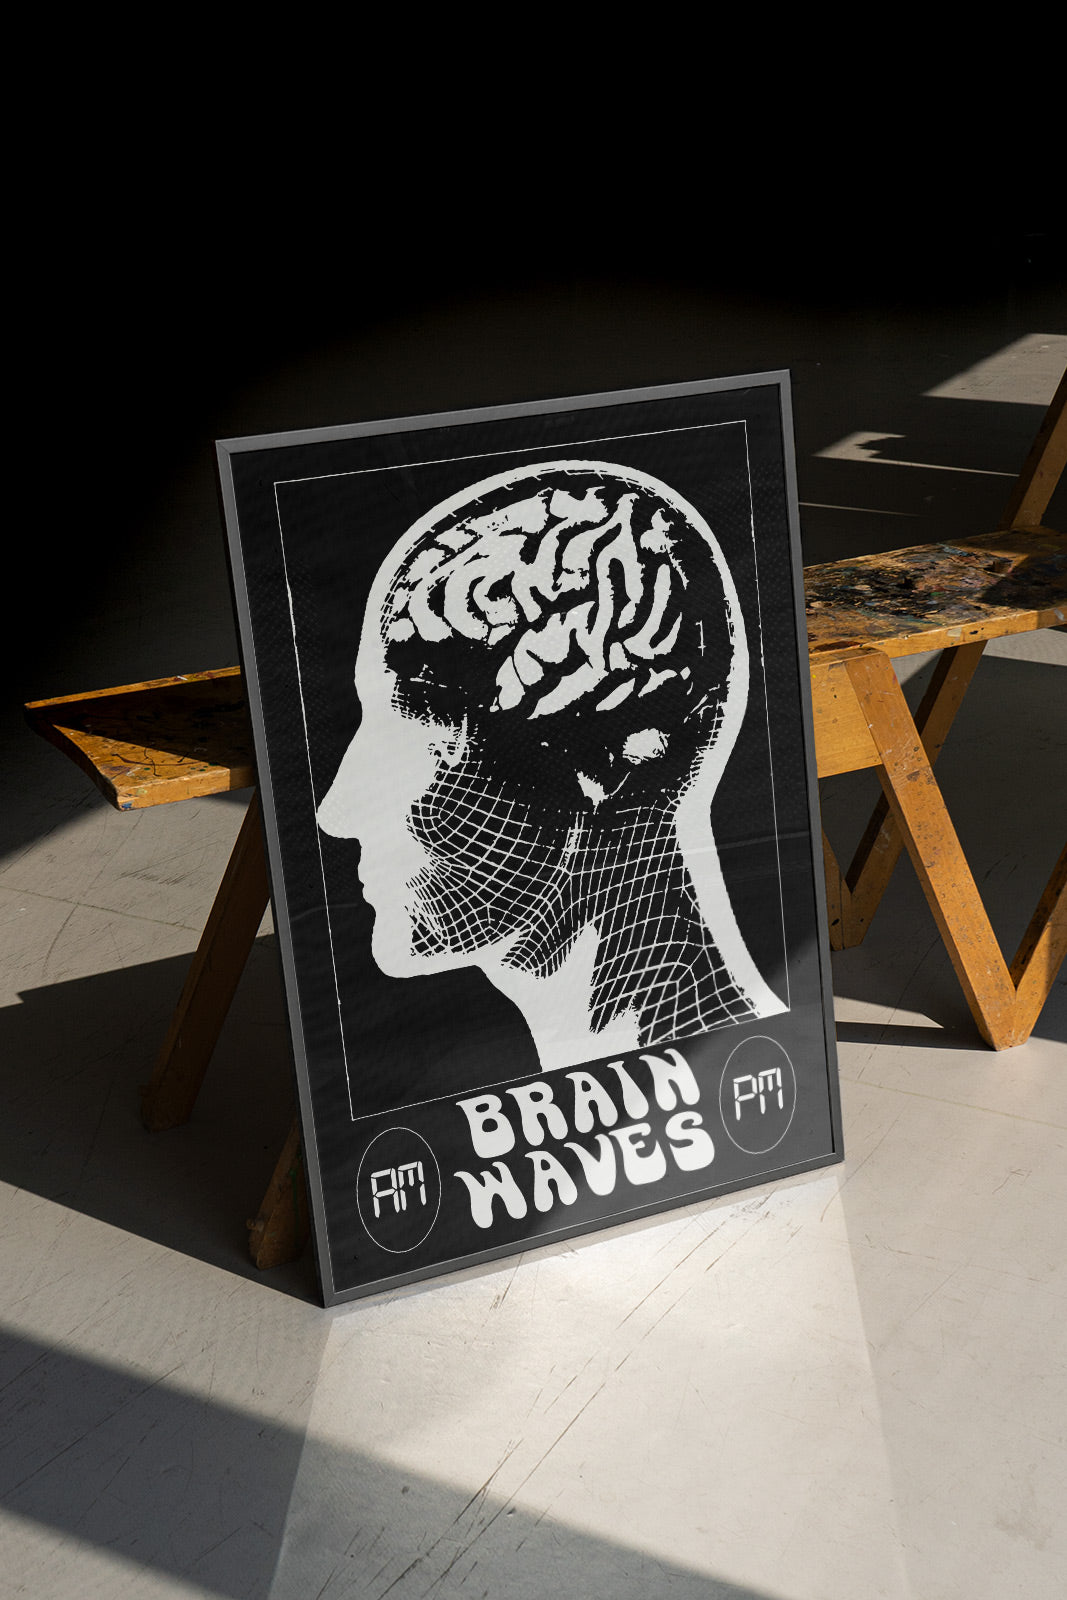 Framed Duties Brain Waves print poster featuring a black and white illustration of a translucent human head, with a text saying 'BRAIN WAVES', standing on a white floor and leaning against a wooden bench.